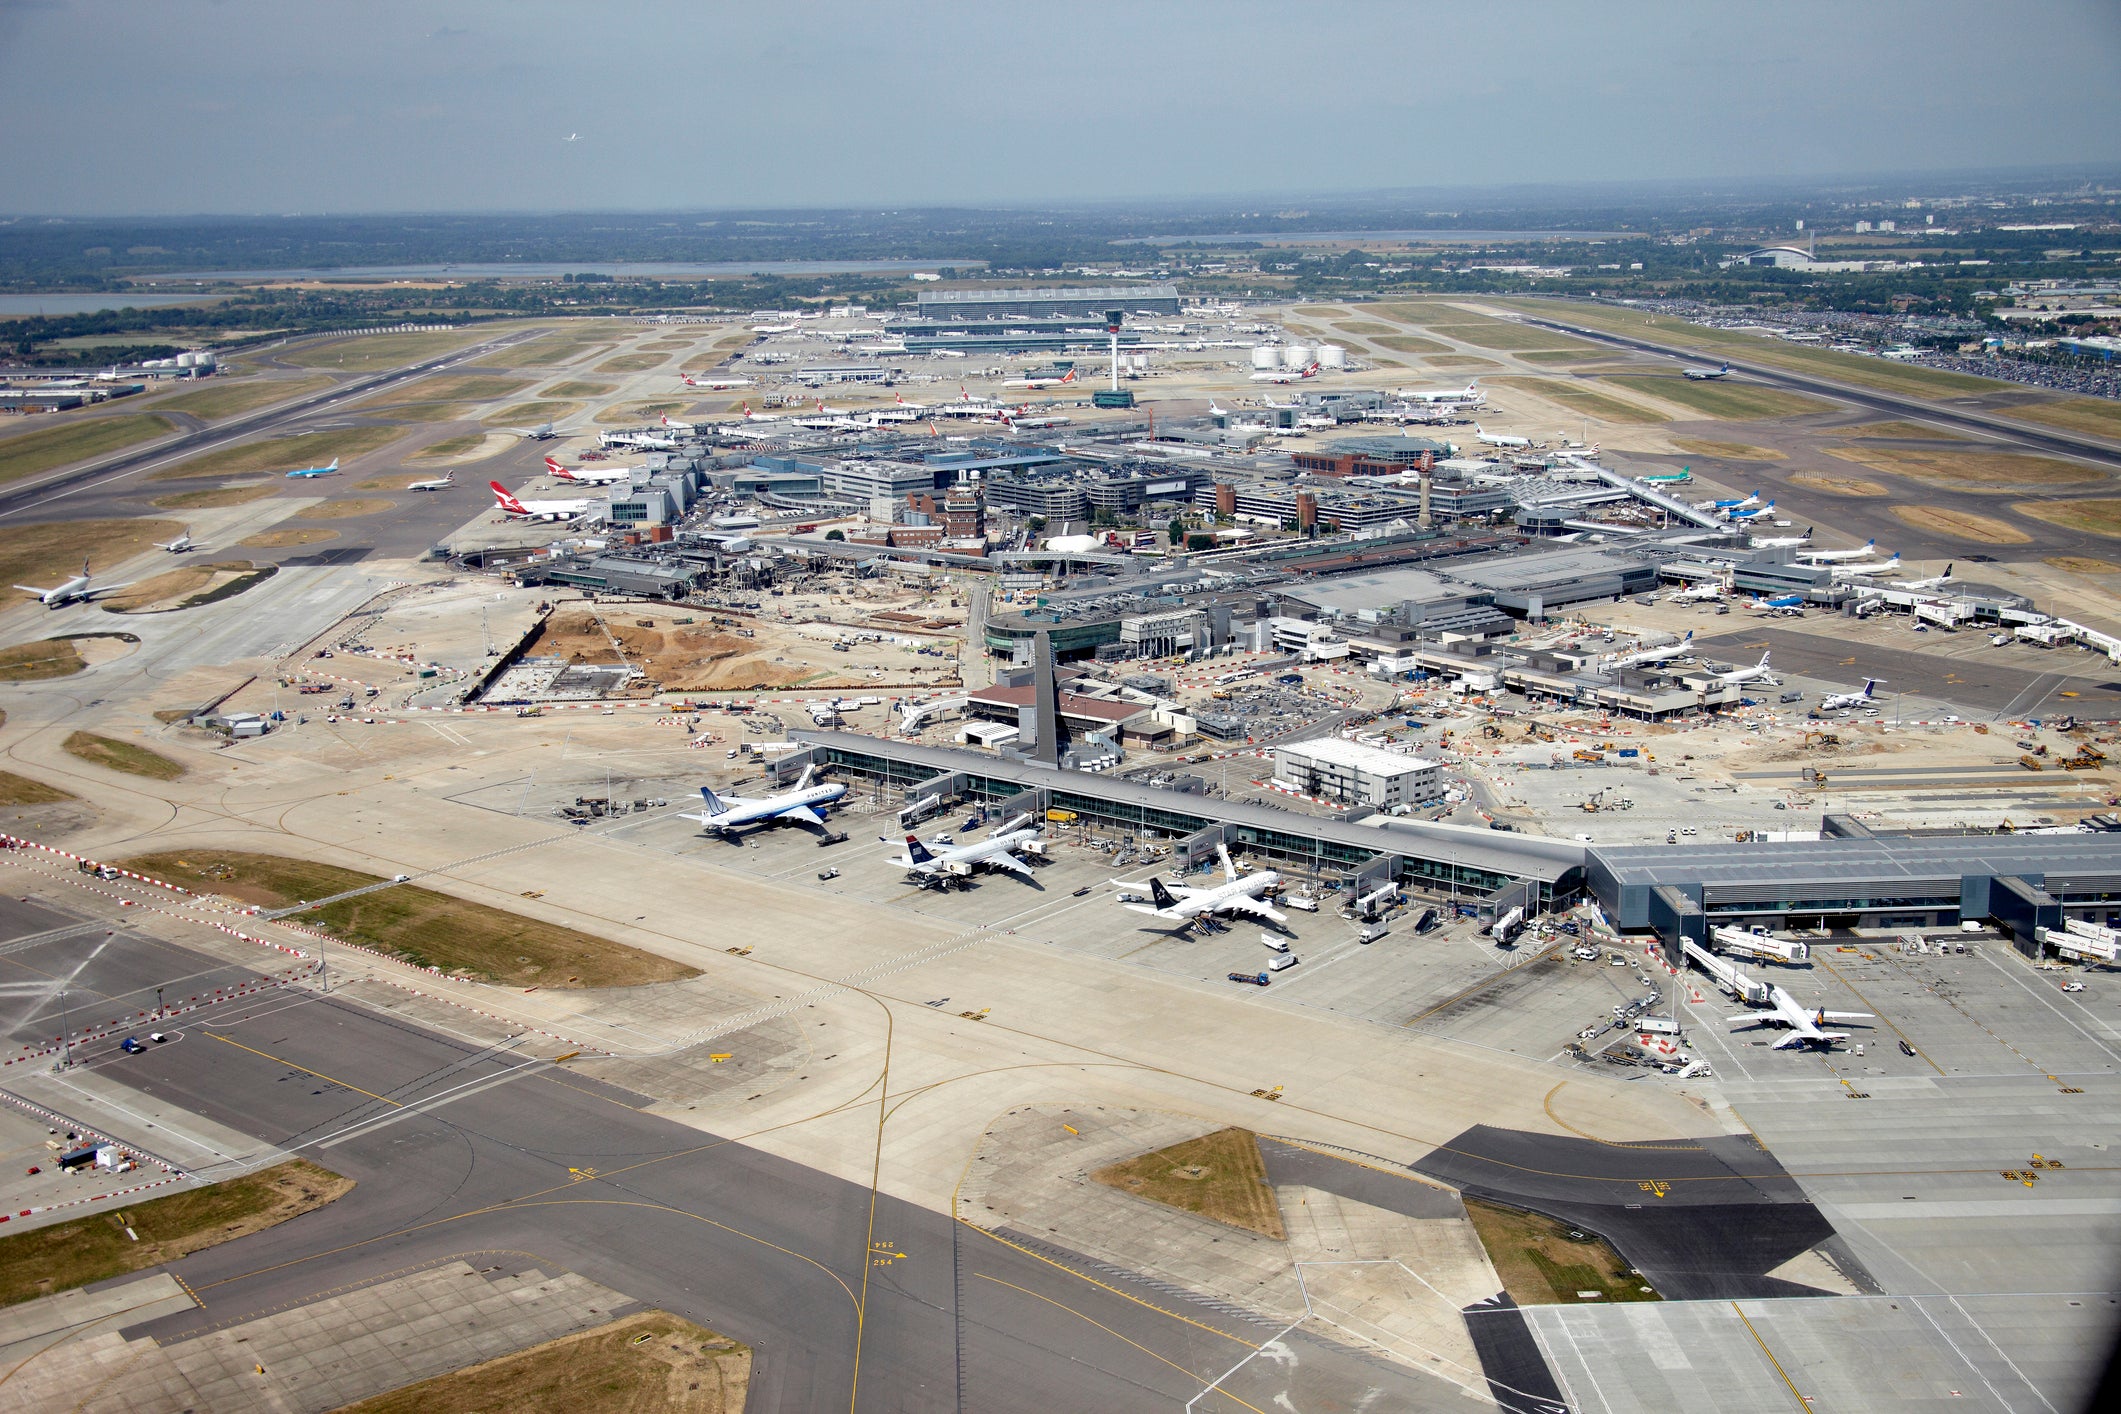 Aerial view west of Heathrow Airport